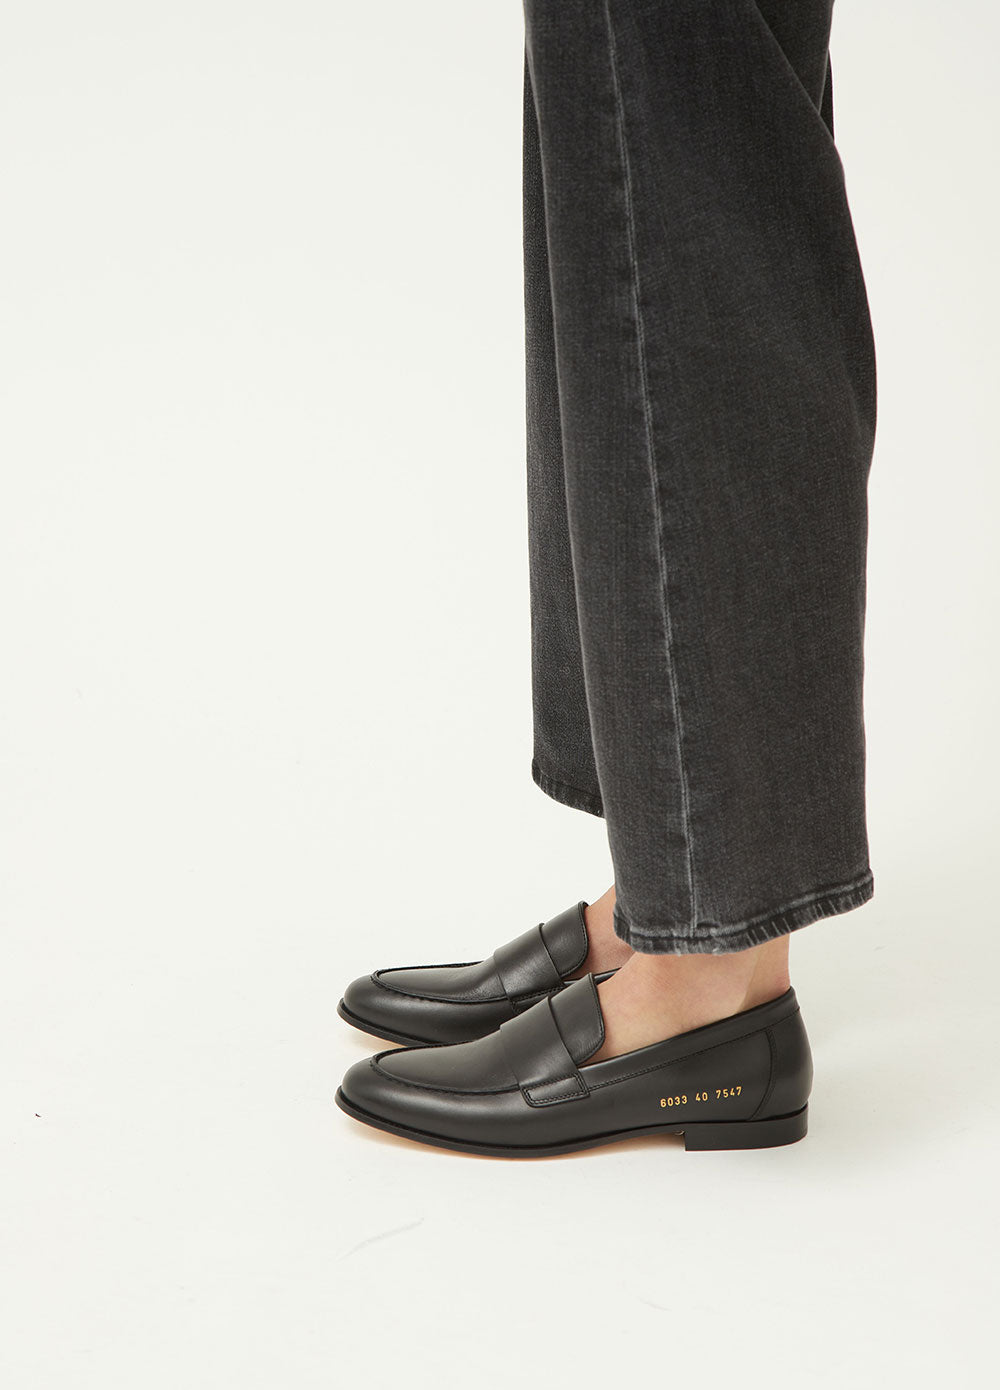 Women's Black Loafer by Common Projects 